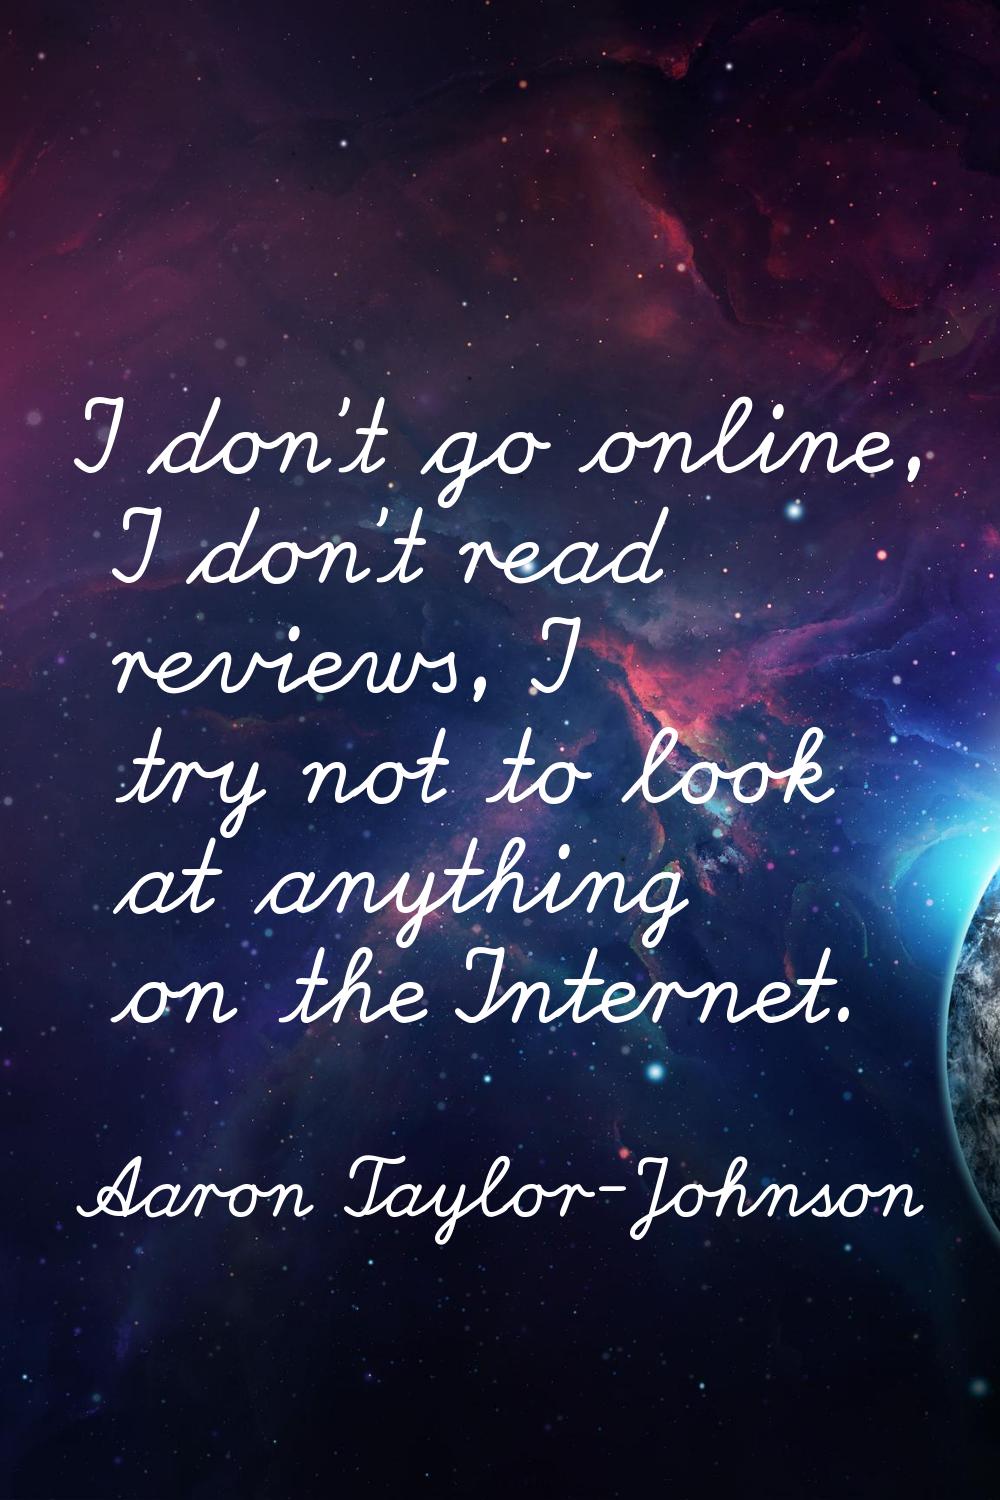 I don't go online, I don't read reviews, I try not to look at anything on the Internet.